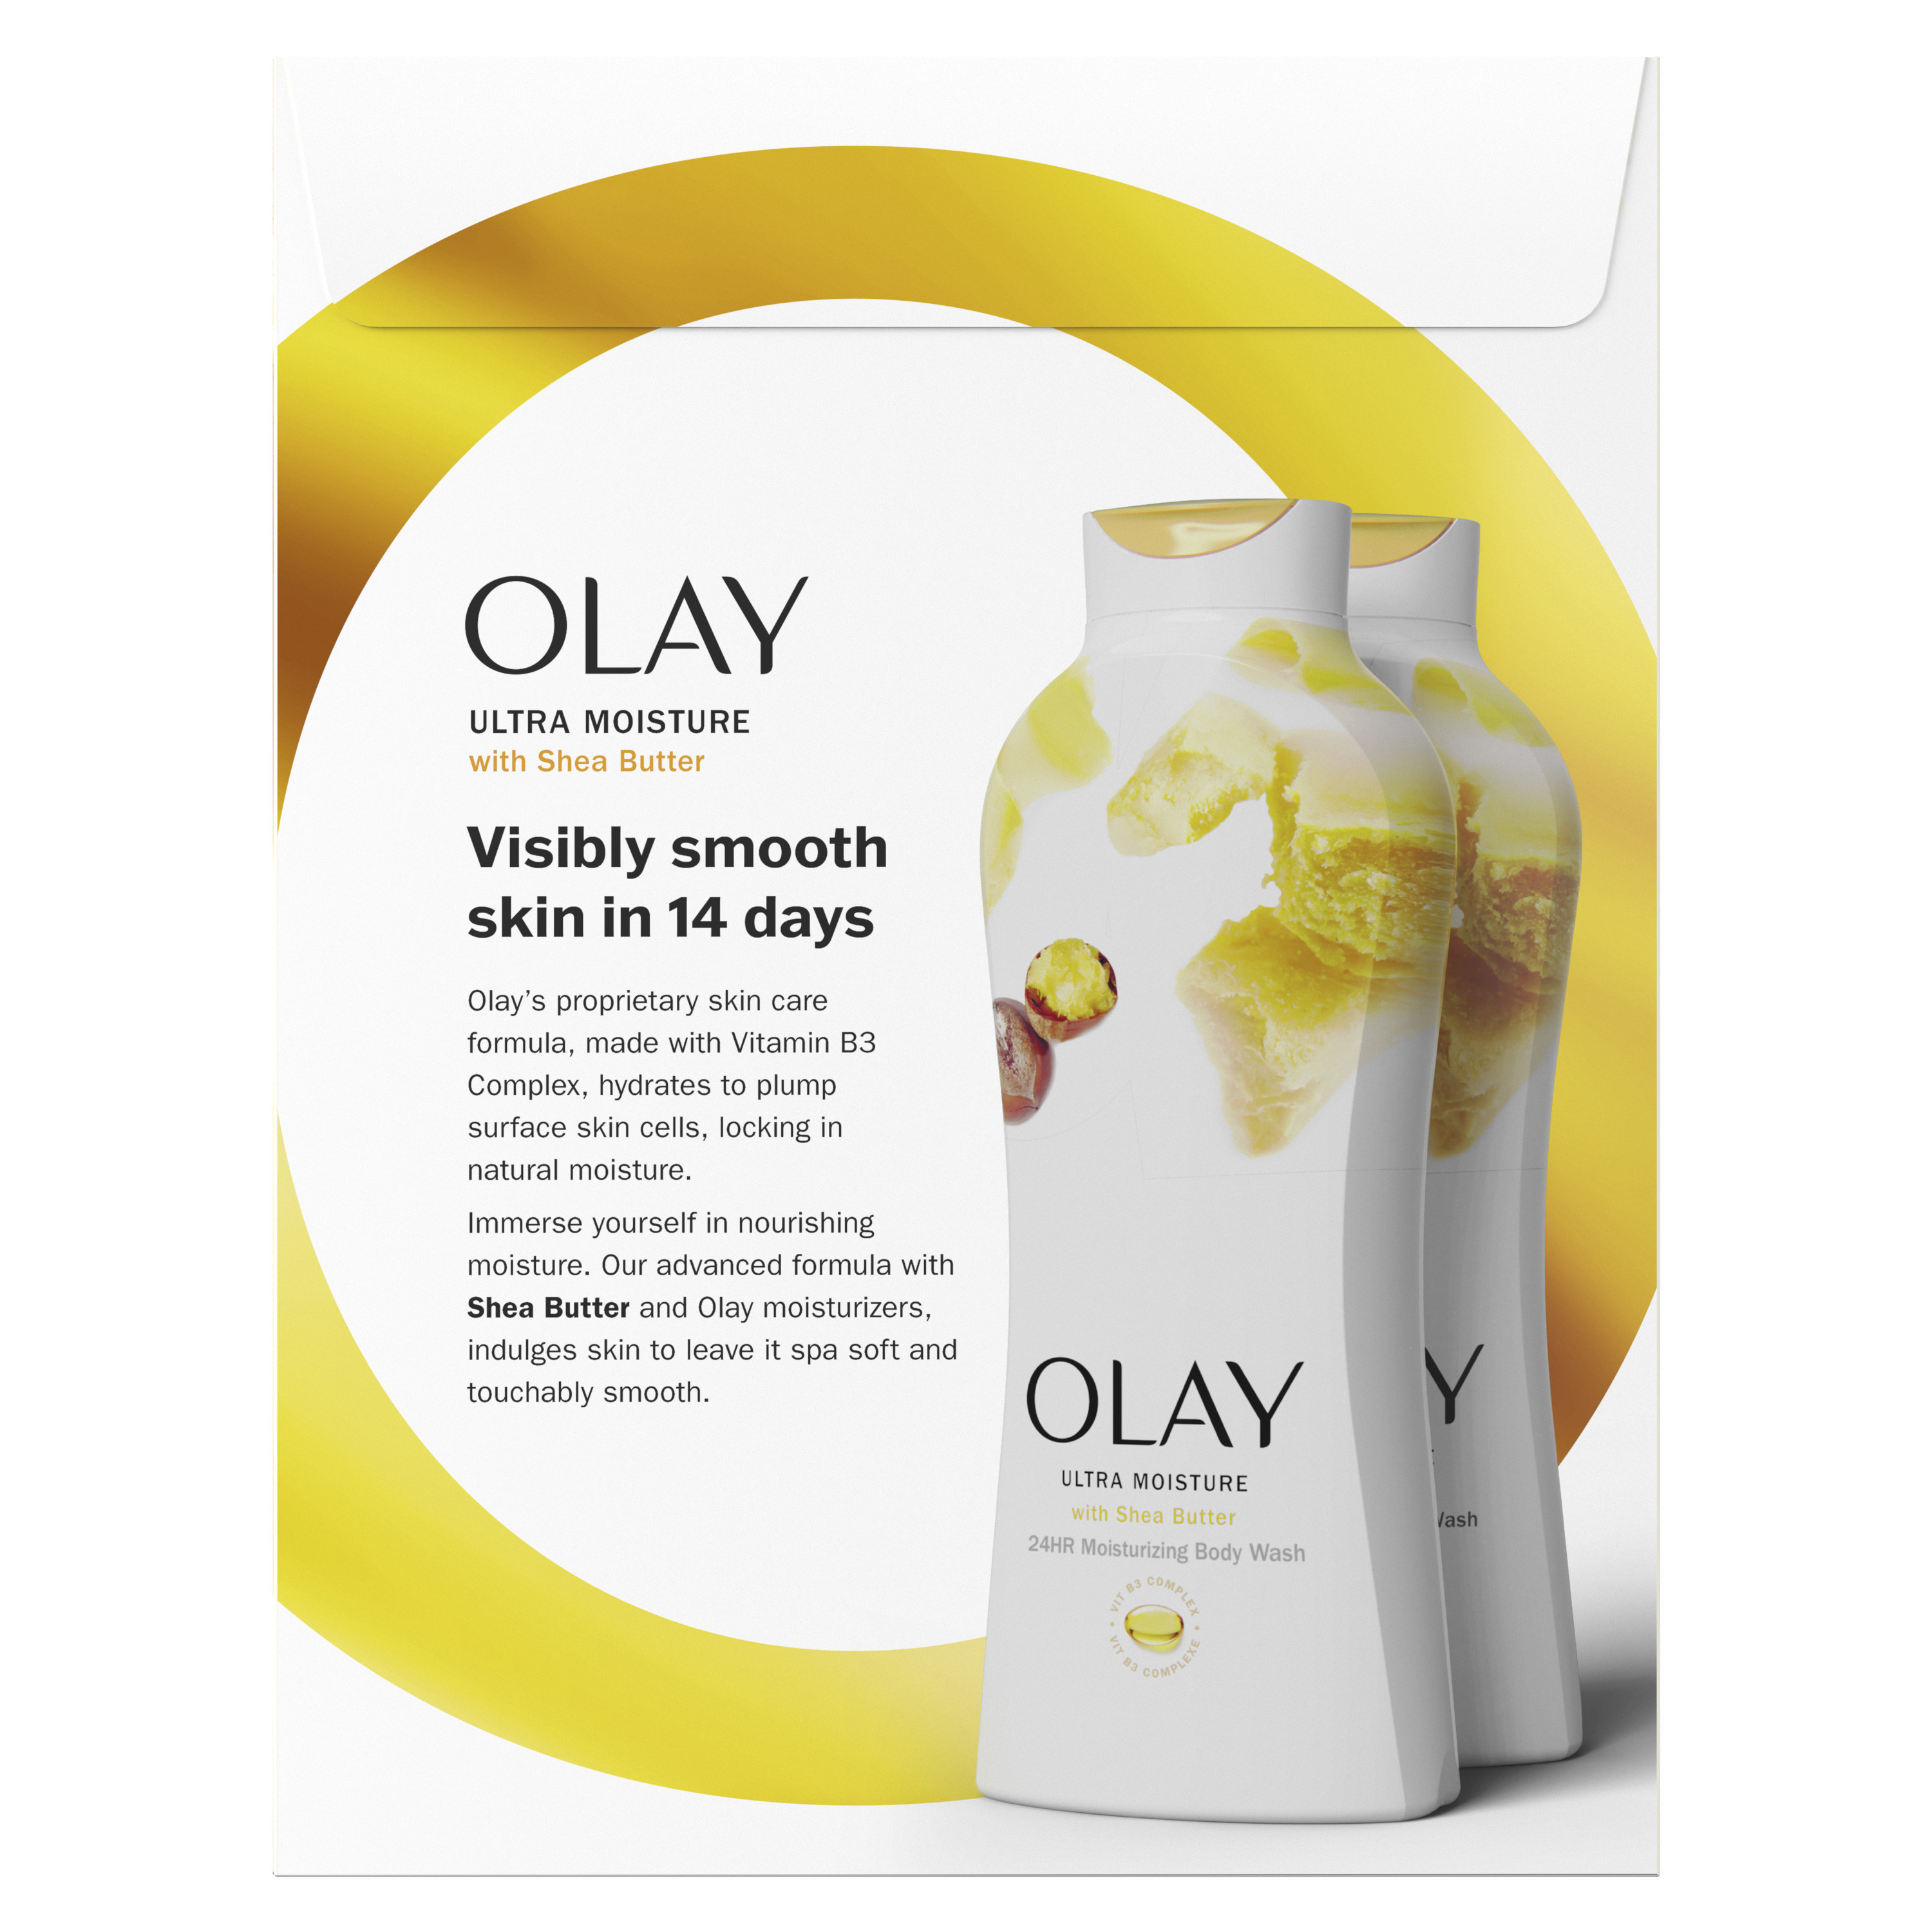 Olay Ultra Moisture Body Wash with Shea Butter, 22 fl oz, Pack of 2 - image 8 of 8